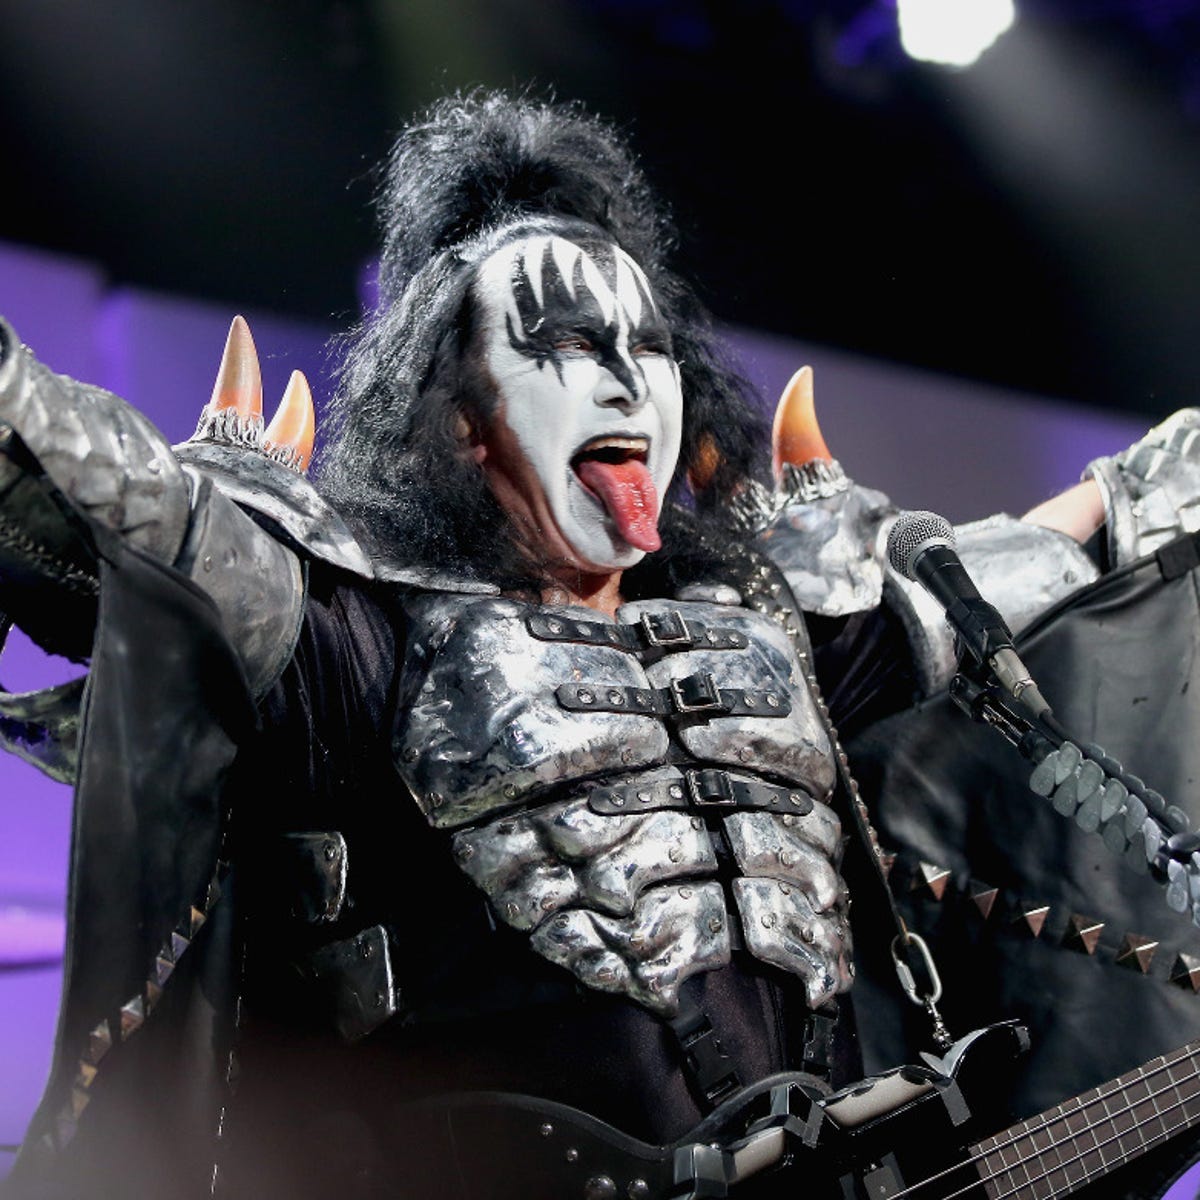 Technology makes everything less emotional, says Gene Simmons of Kiss - CNET